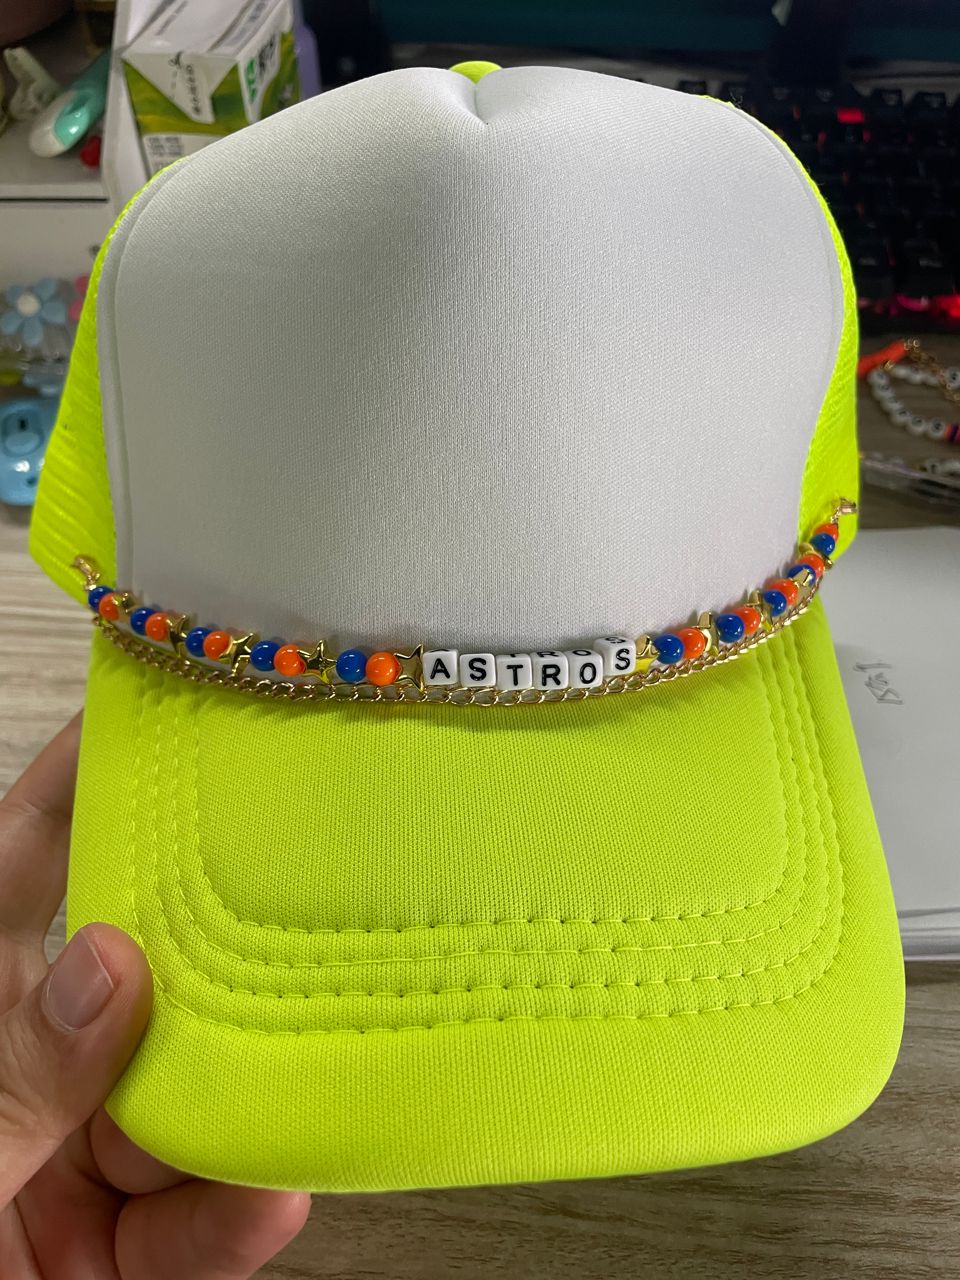 Astros Hat Chain (Multiple Options)